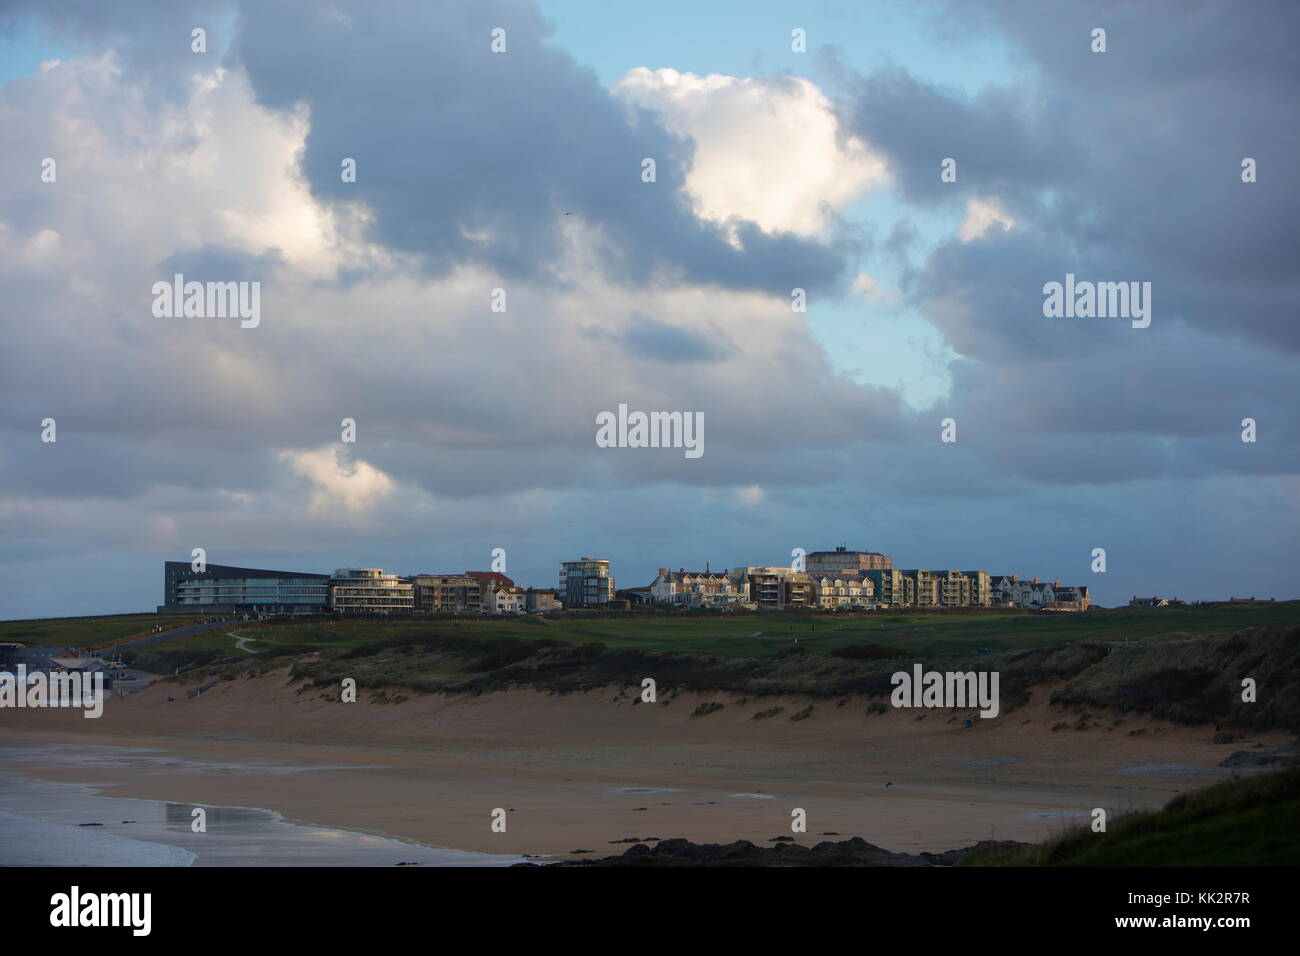 NEWQUAY, CORNWALL, UK - NOVEMBER 28, 2017: Unstable blustery weather moves onto the Cornish coast bringing very strong winds and heavy showers interspersed with bright sunshine. Credit: Nicholas Burningham/Alamy Live News Stock Photo